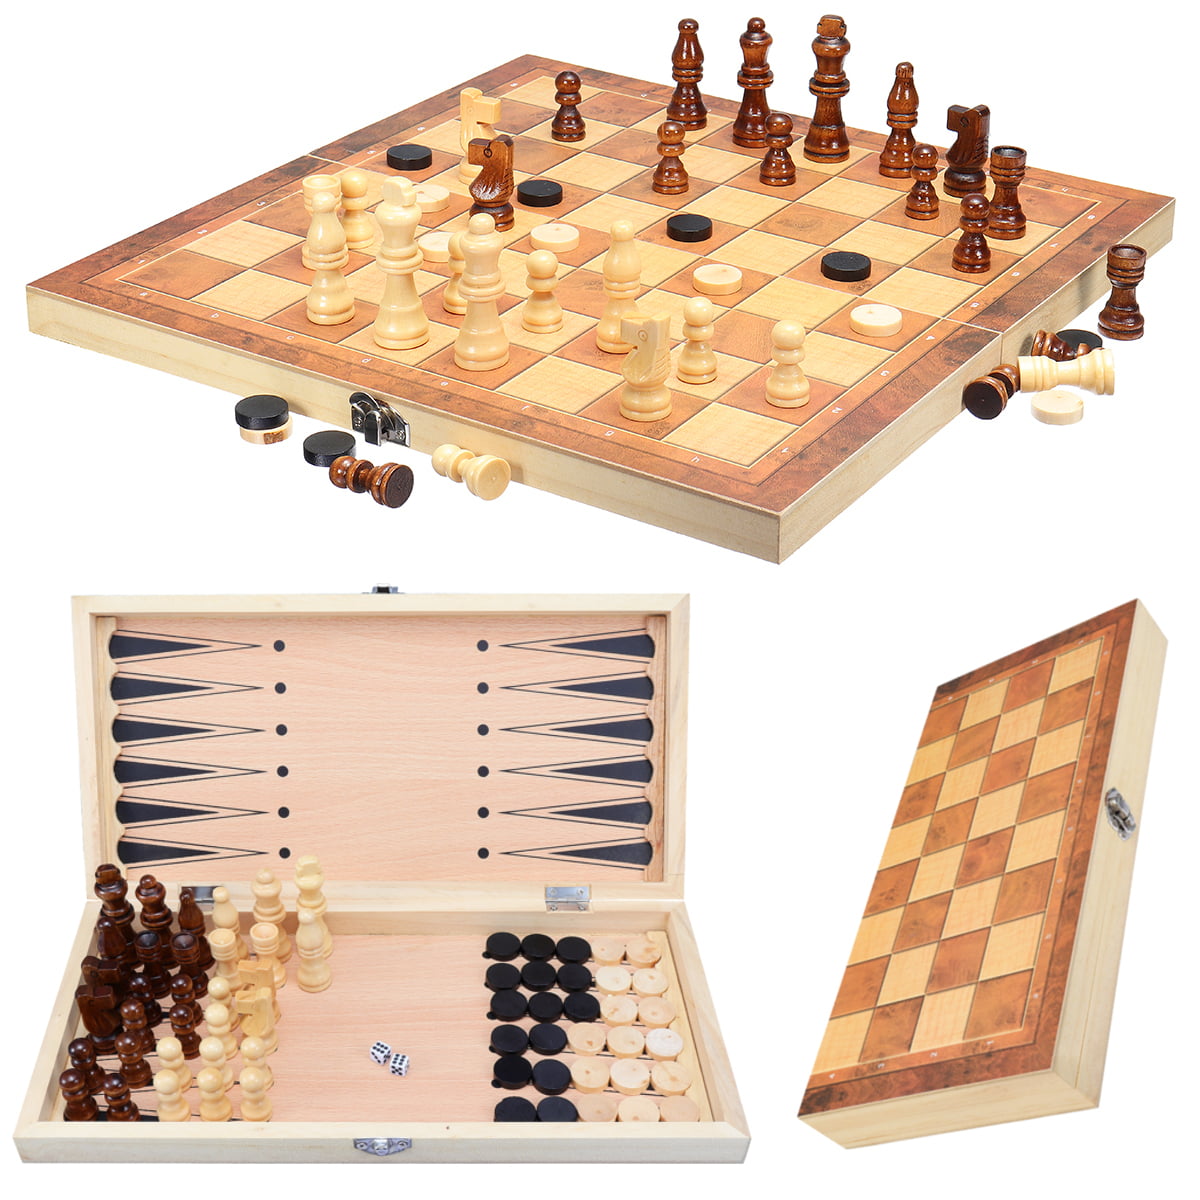 Large FOLDING WOODEN CHESS SET Board Game Checkers Backgammon Draughts Toys Gift 